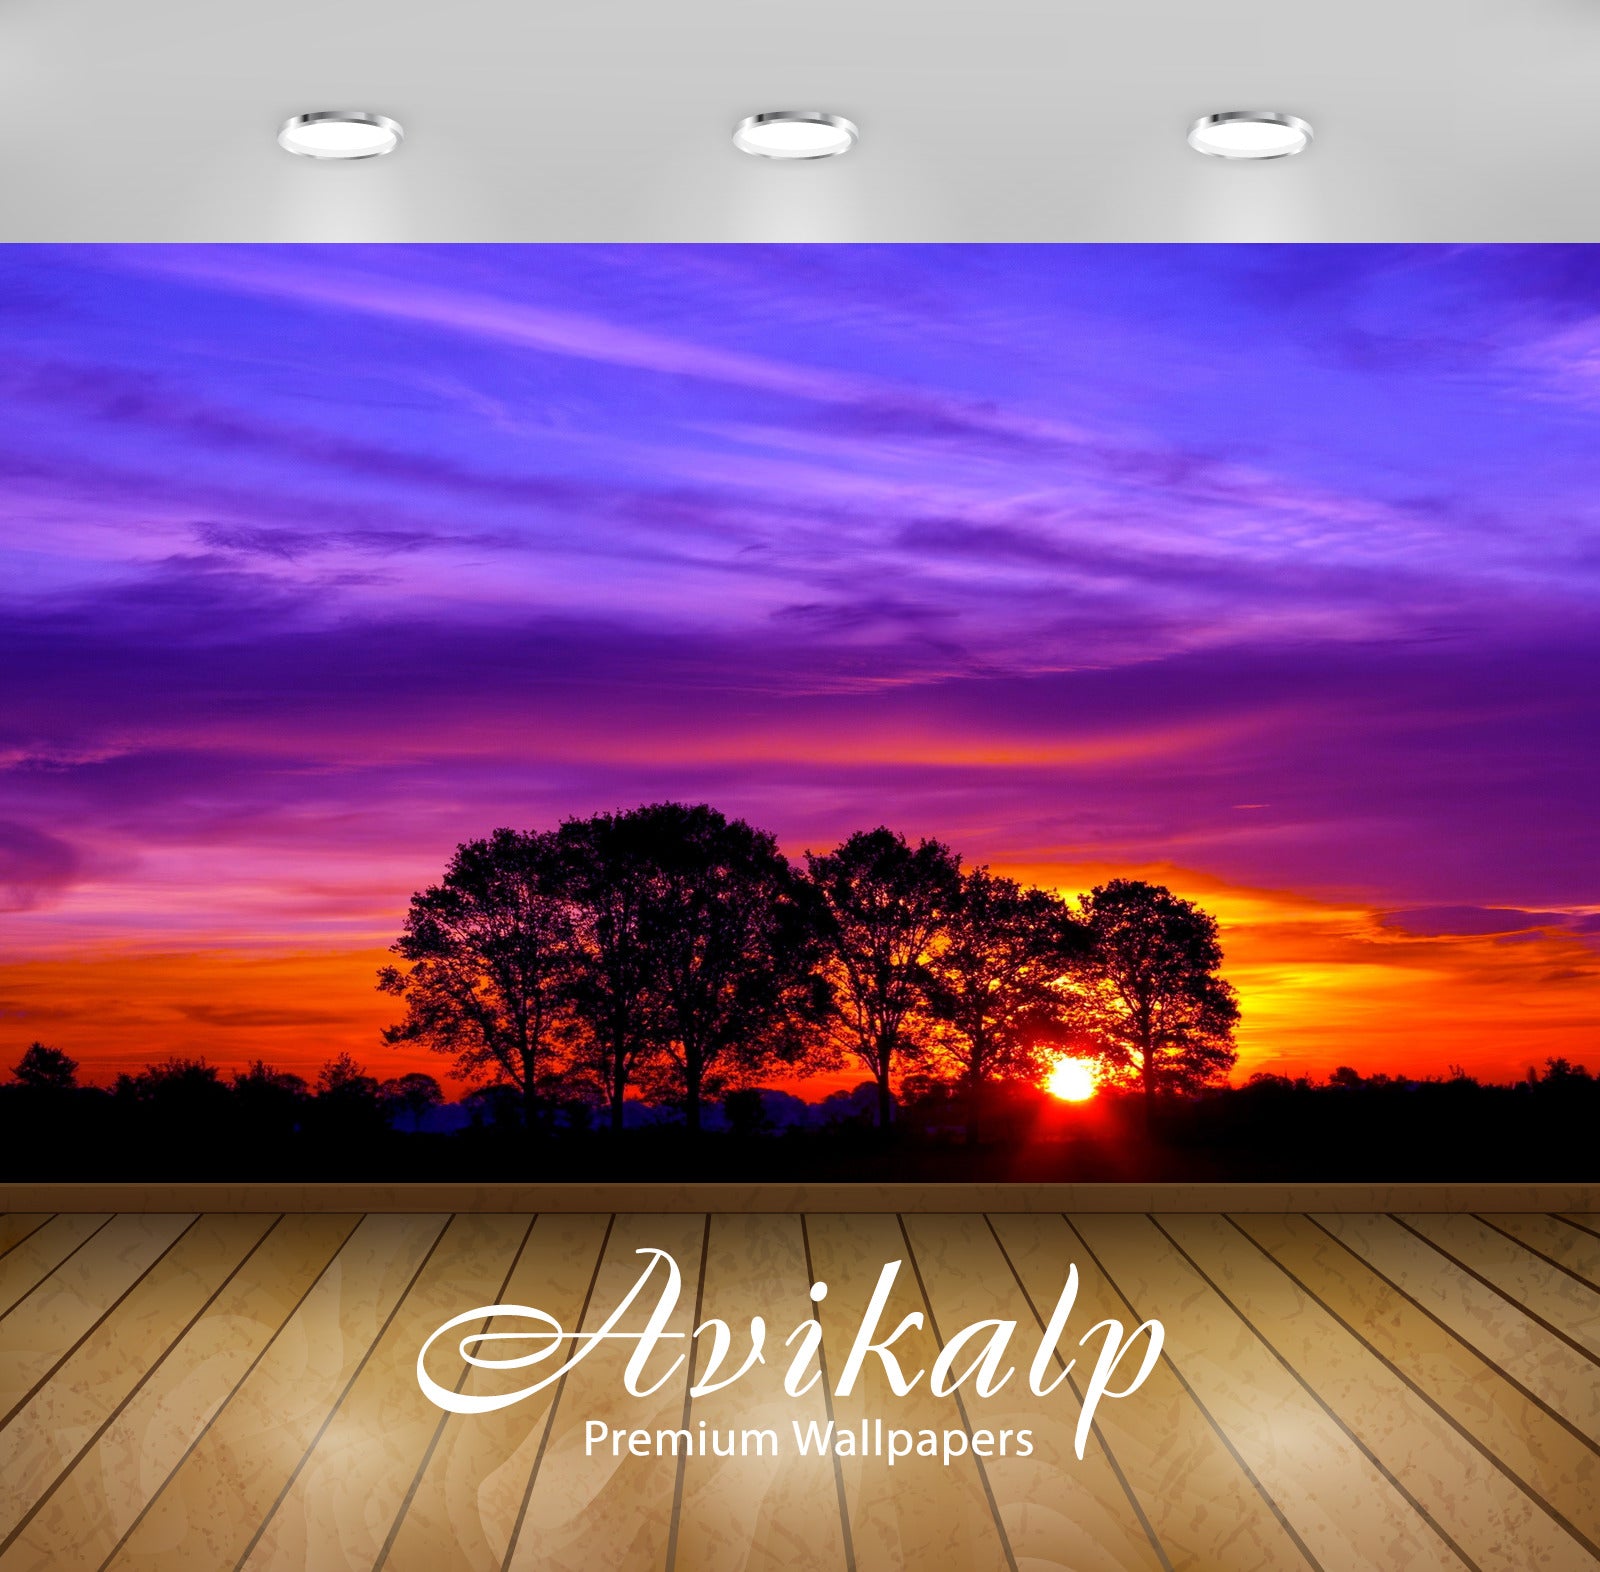 Avikalp Exclusive Awi1855 Sunset Full HD Wallpapers for Living room, Hall, Kids Room, Kitchen, TV Ba